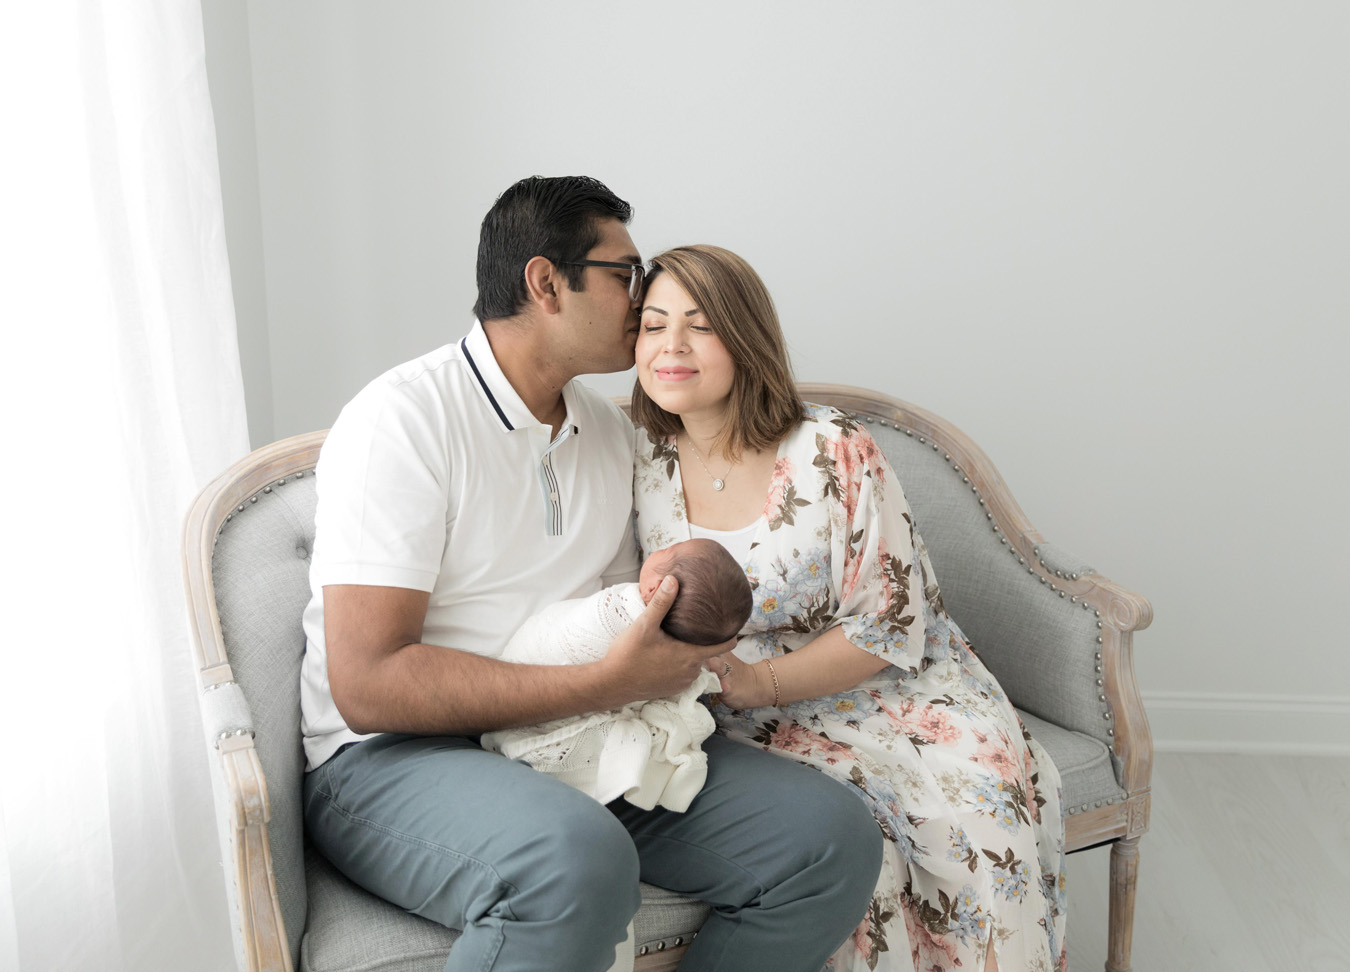 D.C. Baby Stores featuring a man kissing a women on the cheek while holding a newborn baby